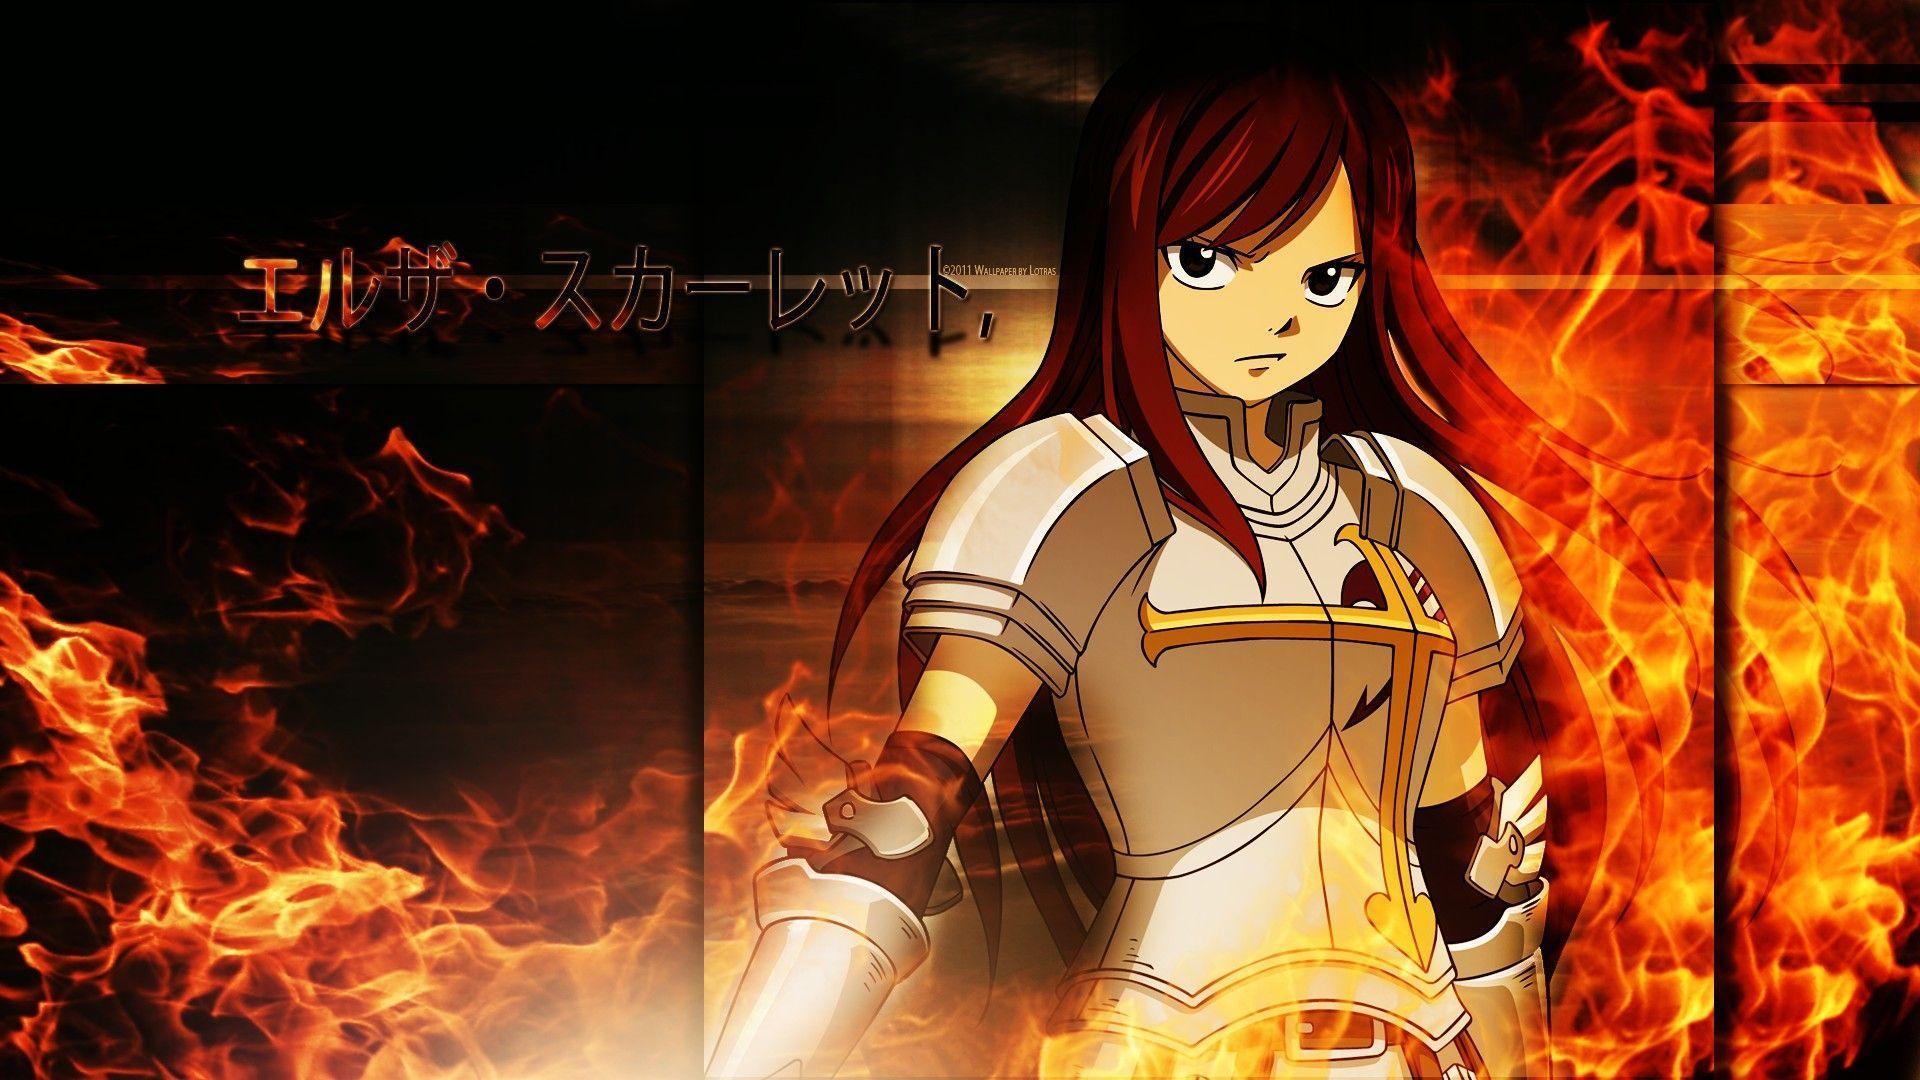 Fairy Tail Erza Scarlet Wallpapers Top Free Fairy Tail Erza Scarlet Backgrounds Wallpaperaccess